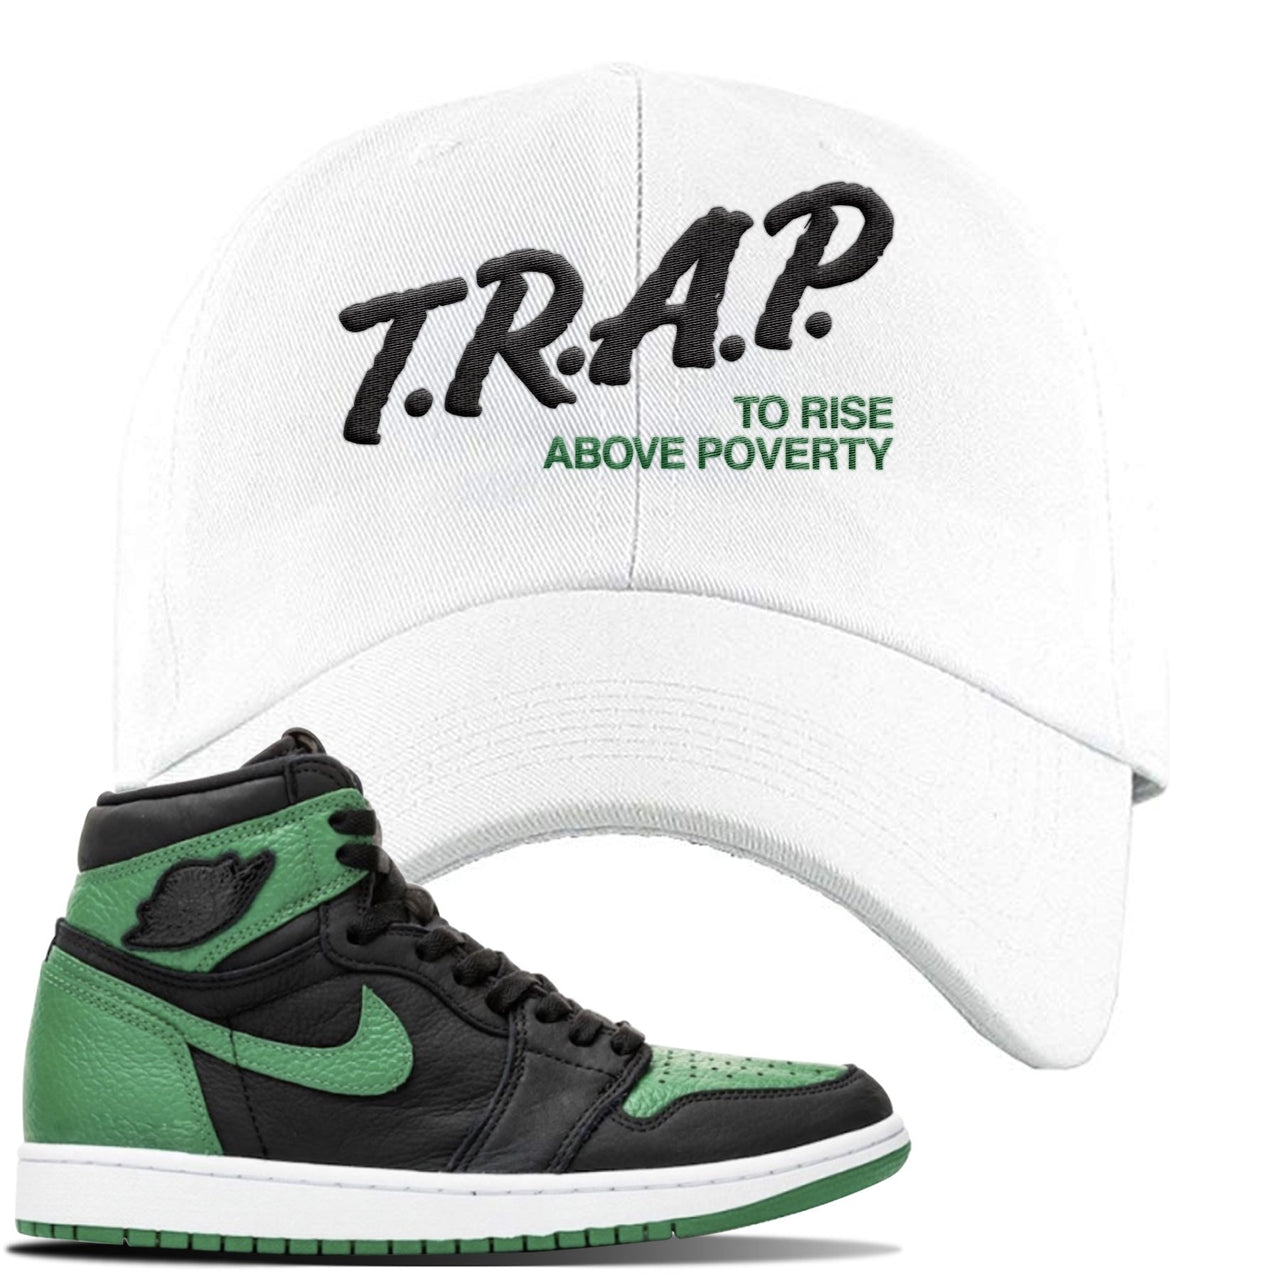 Jordan 1 Retro High OG Pine Green Gym Sneaker White Dad Hat | Hat to match Air Jordan 1 Retro High OG Pine Green Gym Shoes | Trap To Rise Above Poverty